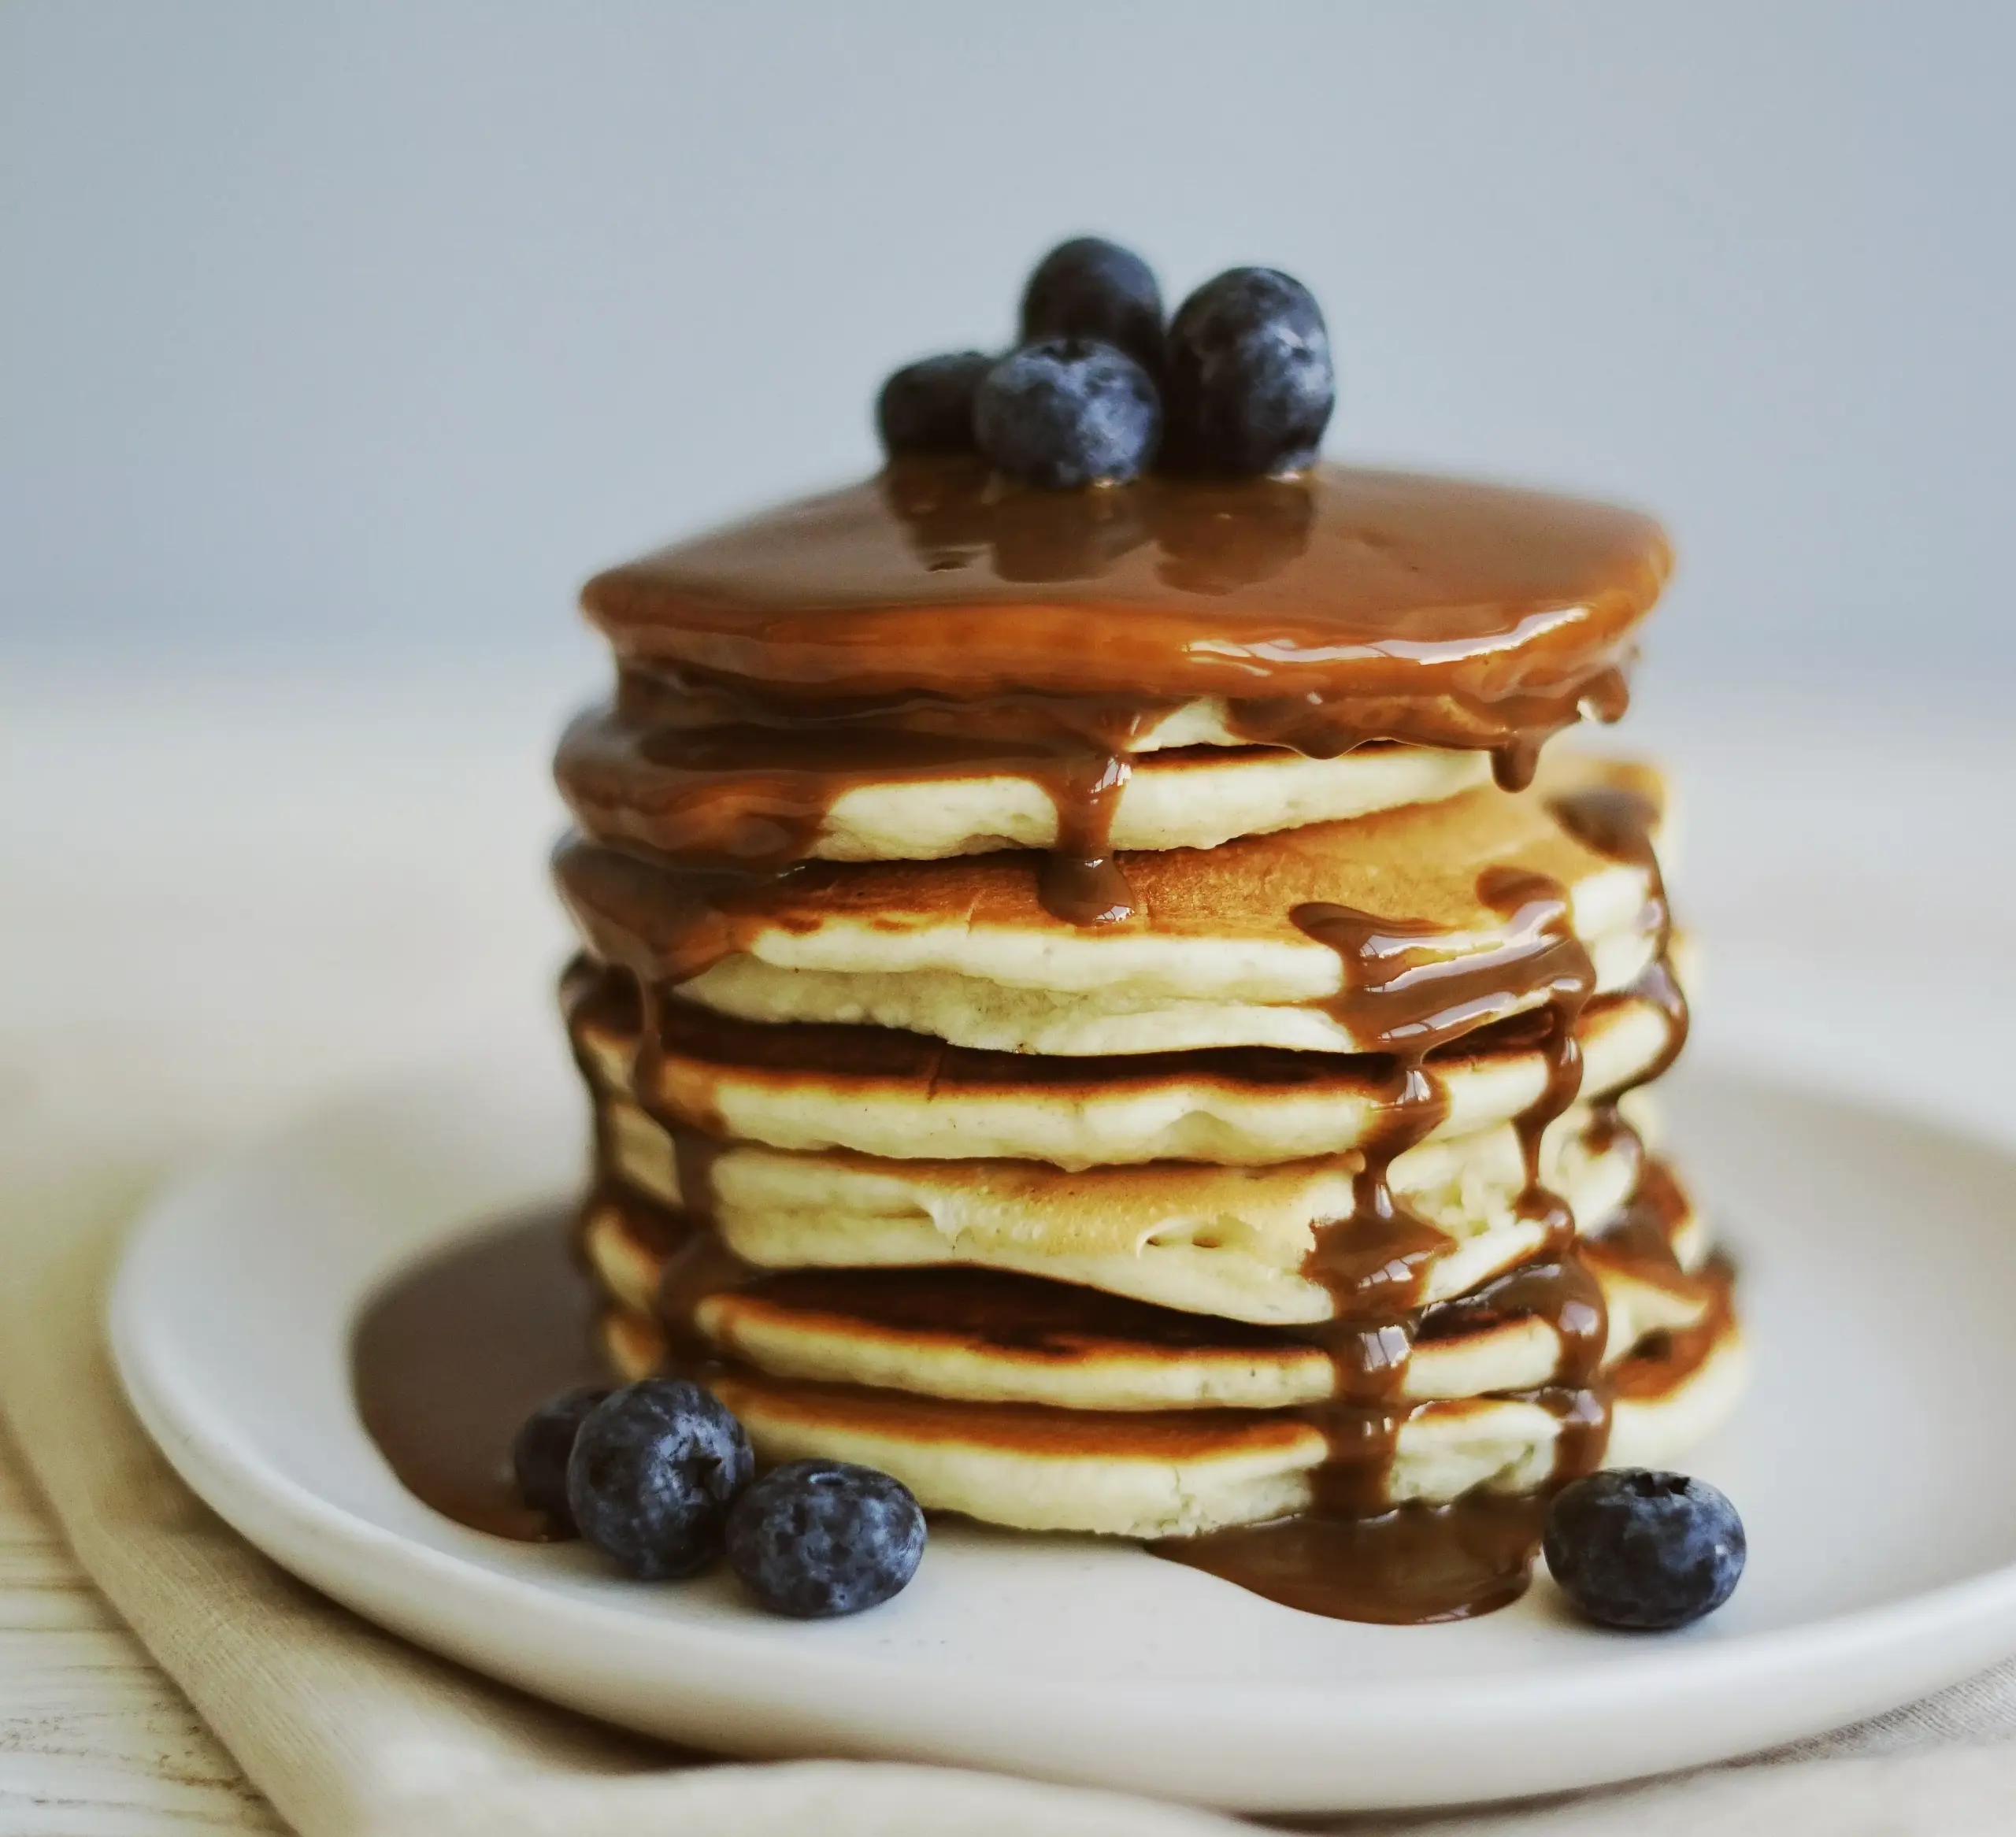 Illustration – Stack of Blueberry Pancakes in a kitchen